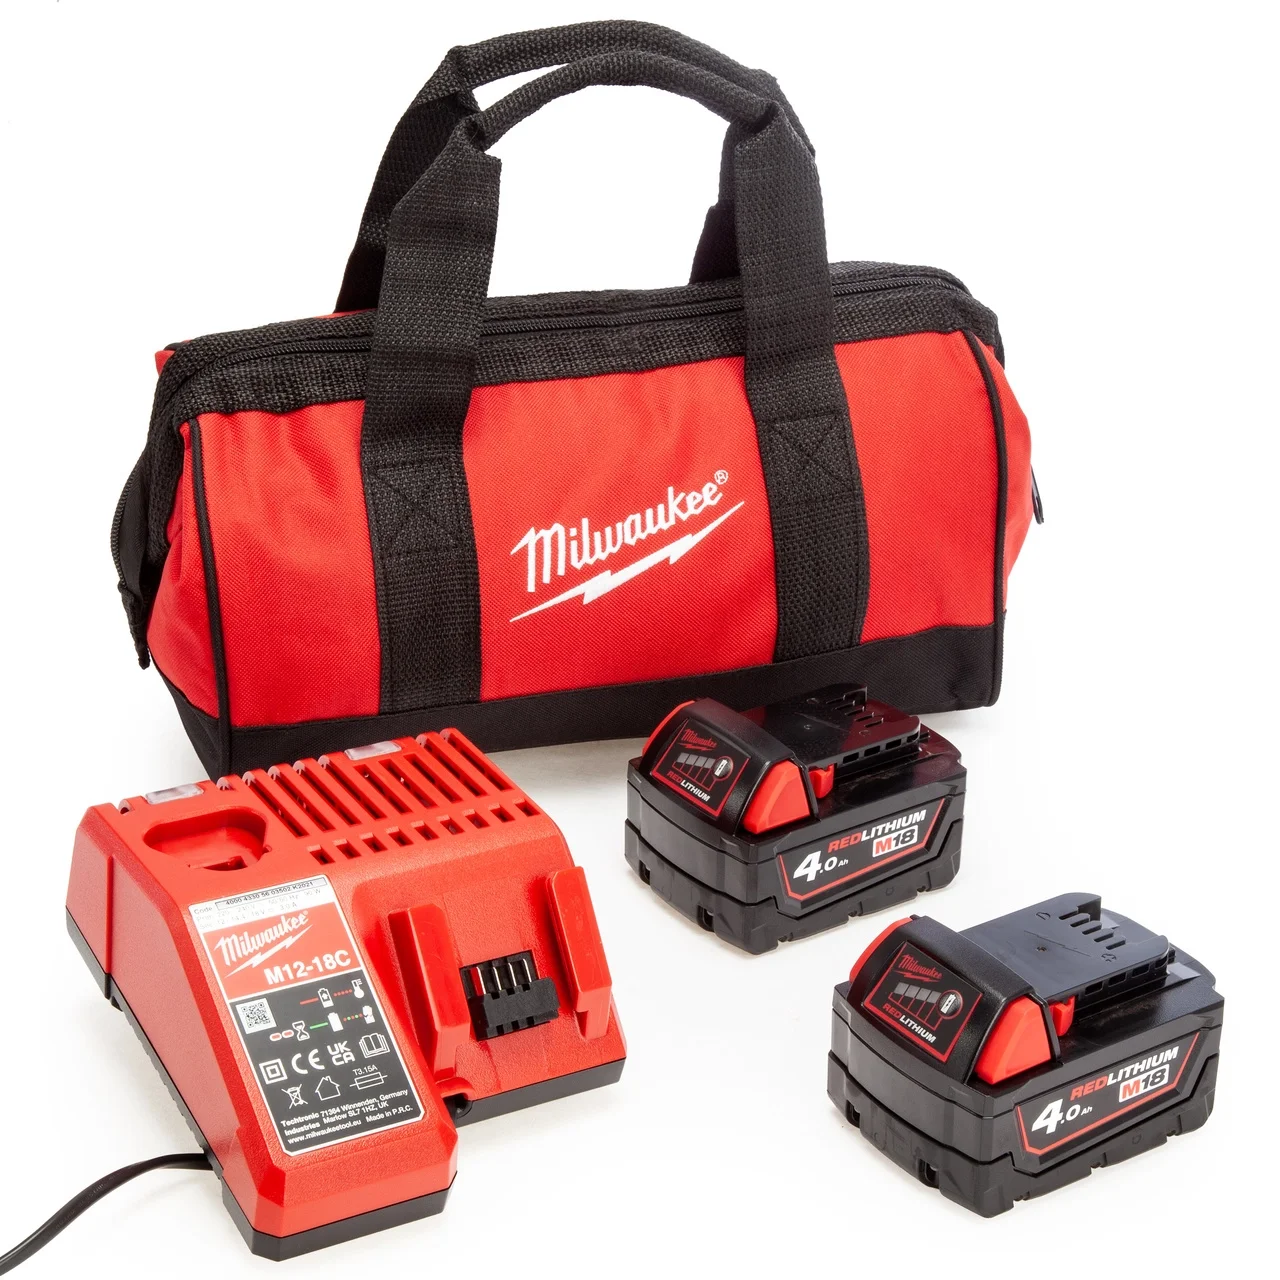 Image of Milwaukee <br><strong>18V Charger & 2 x 4.0Ah Batteries</strong>